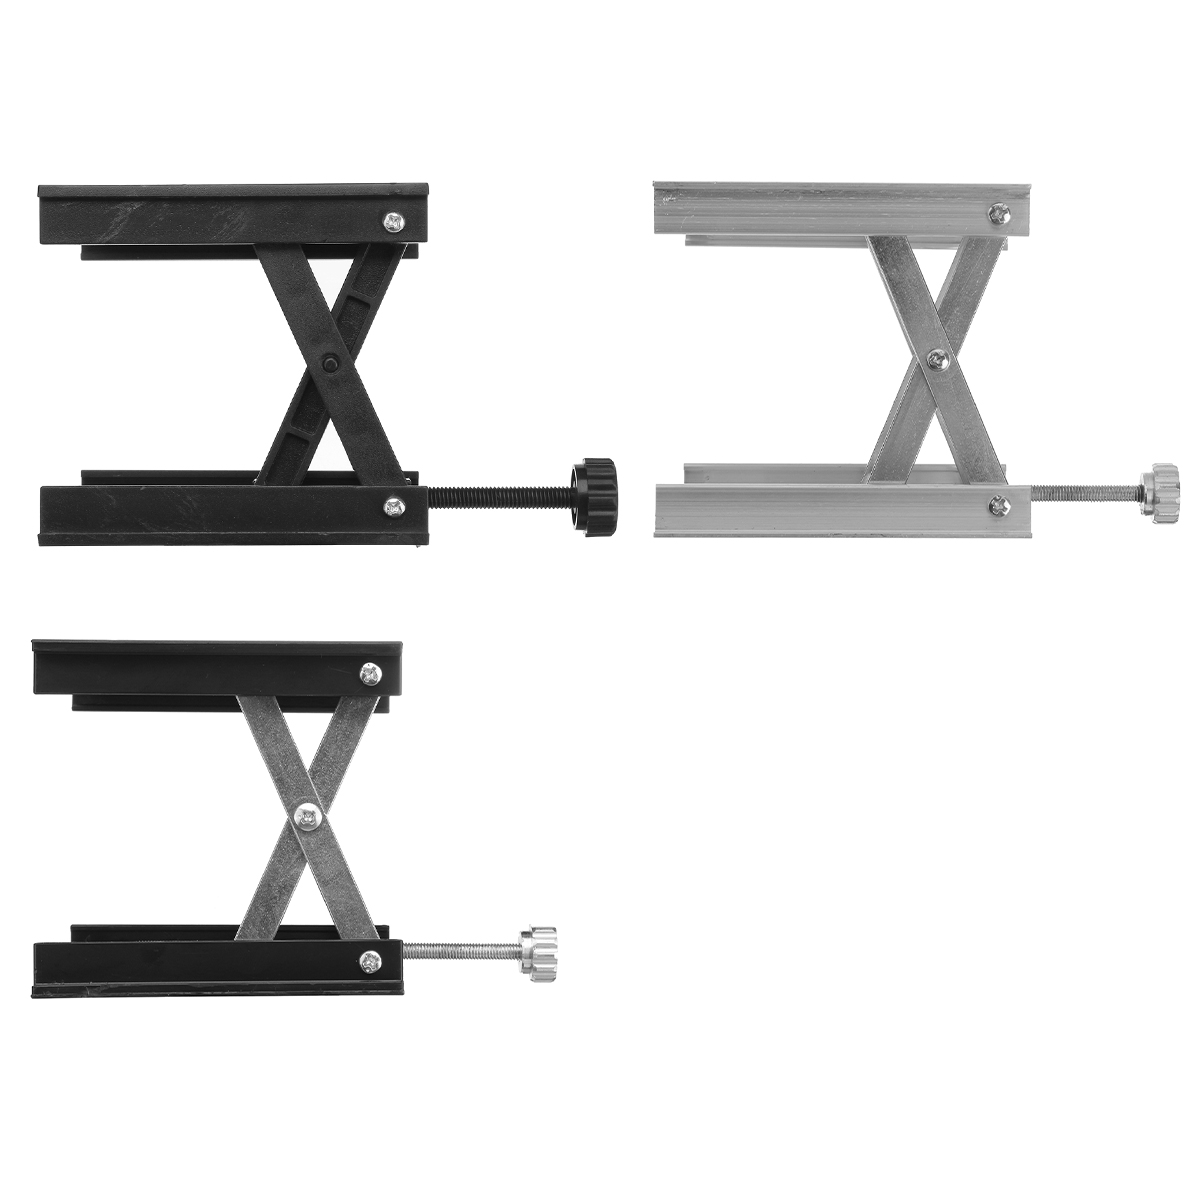 25-65-99cm-Aluminum-Router-Table-Woodworking-Engraving-Lab-Lifting-Stand-Rack-Platform-Benches-1861024-3